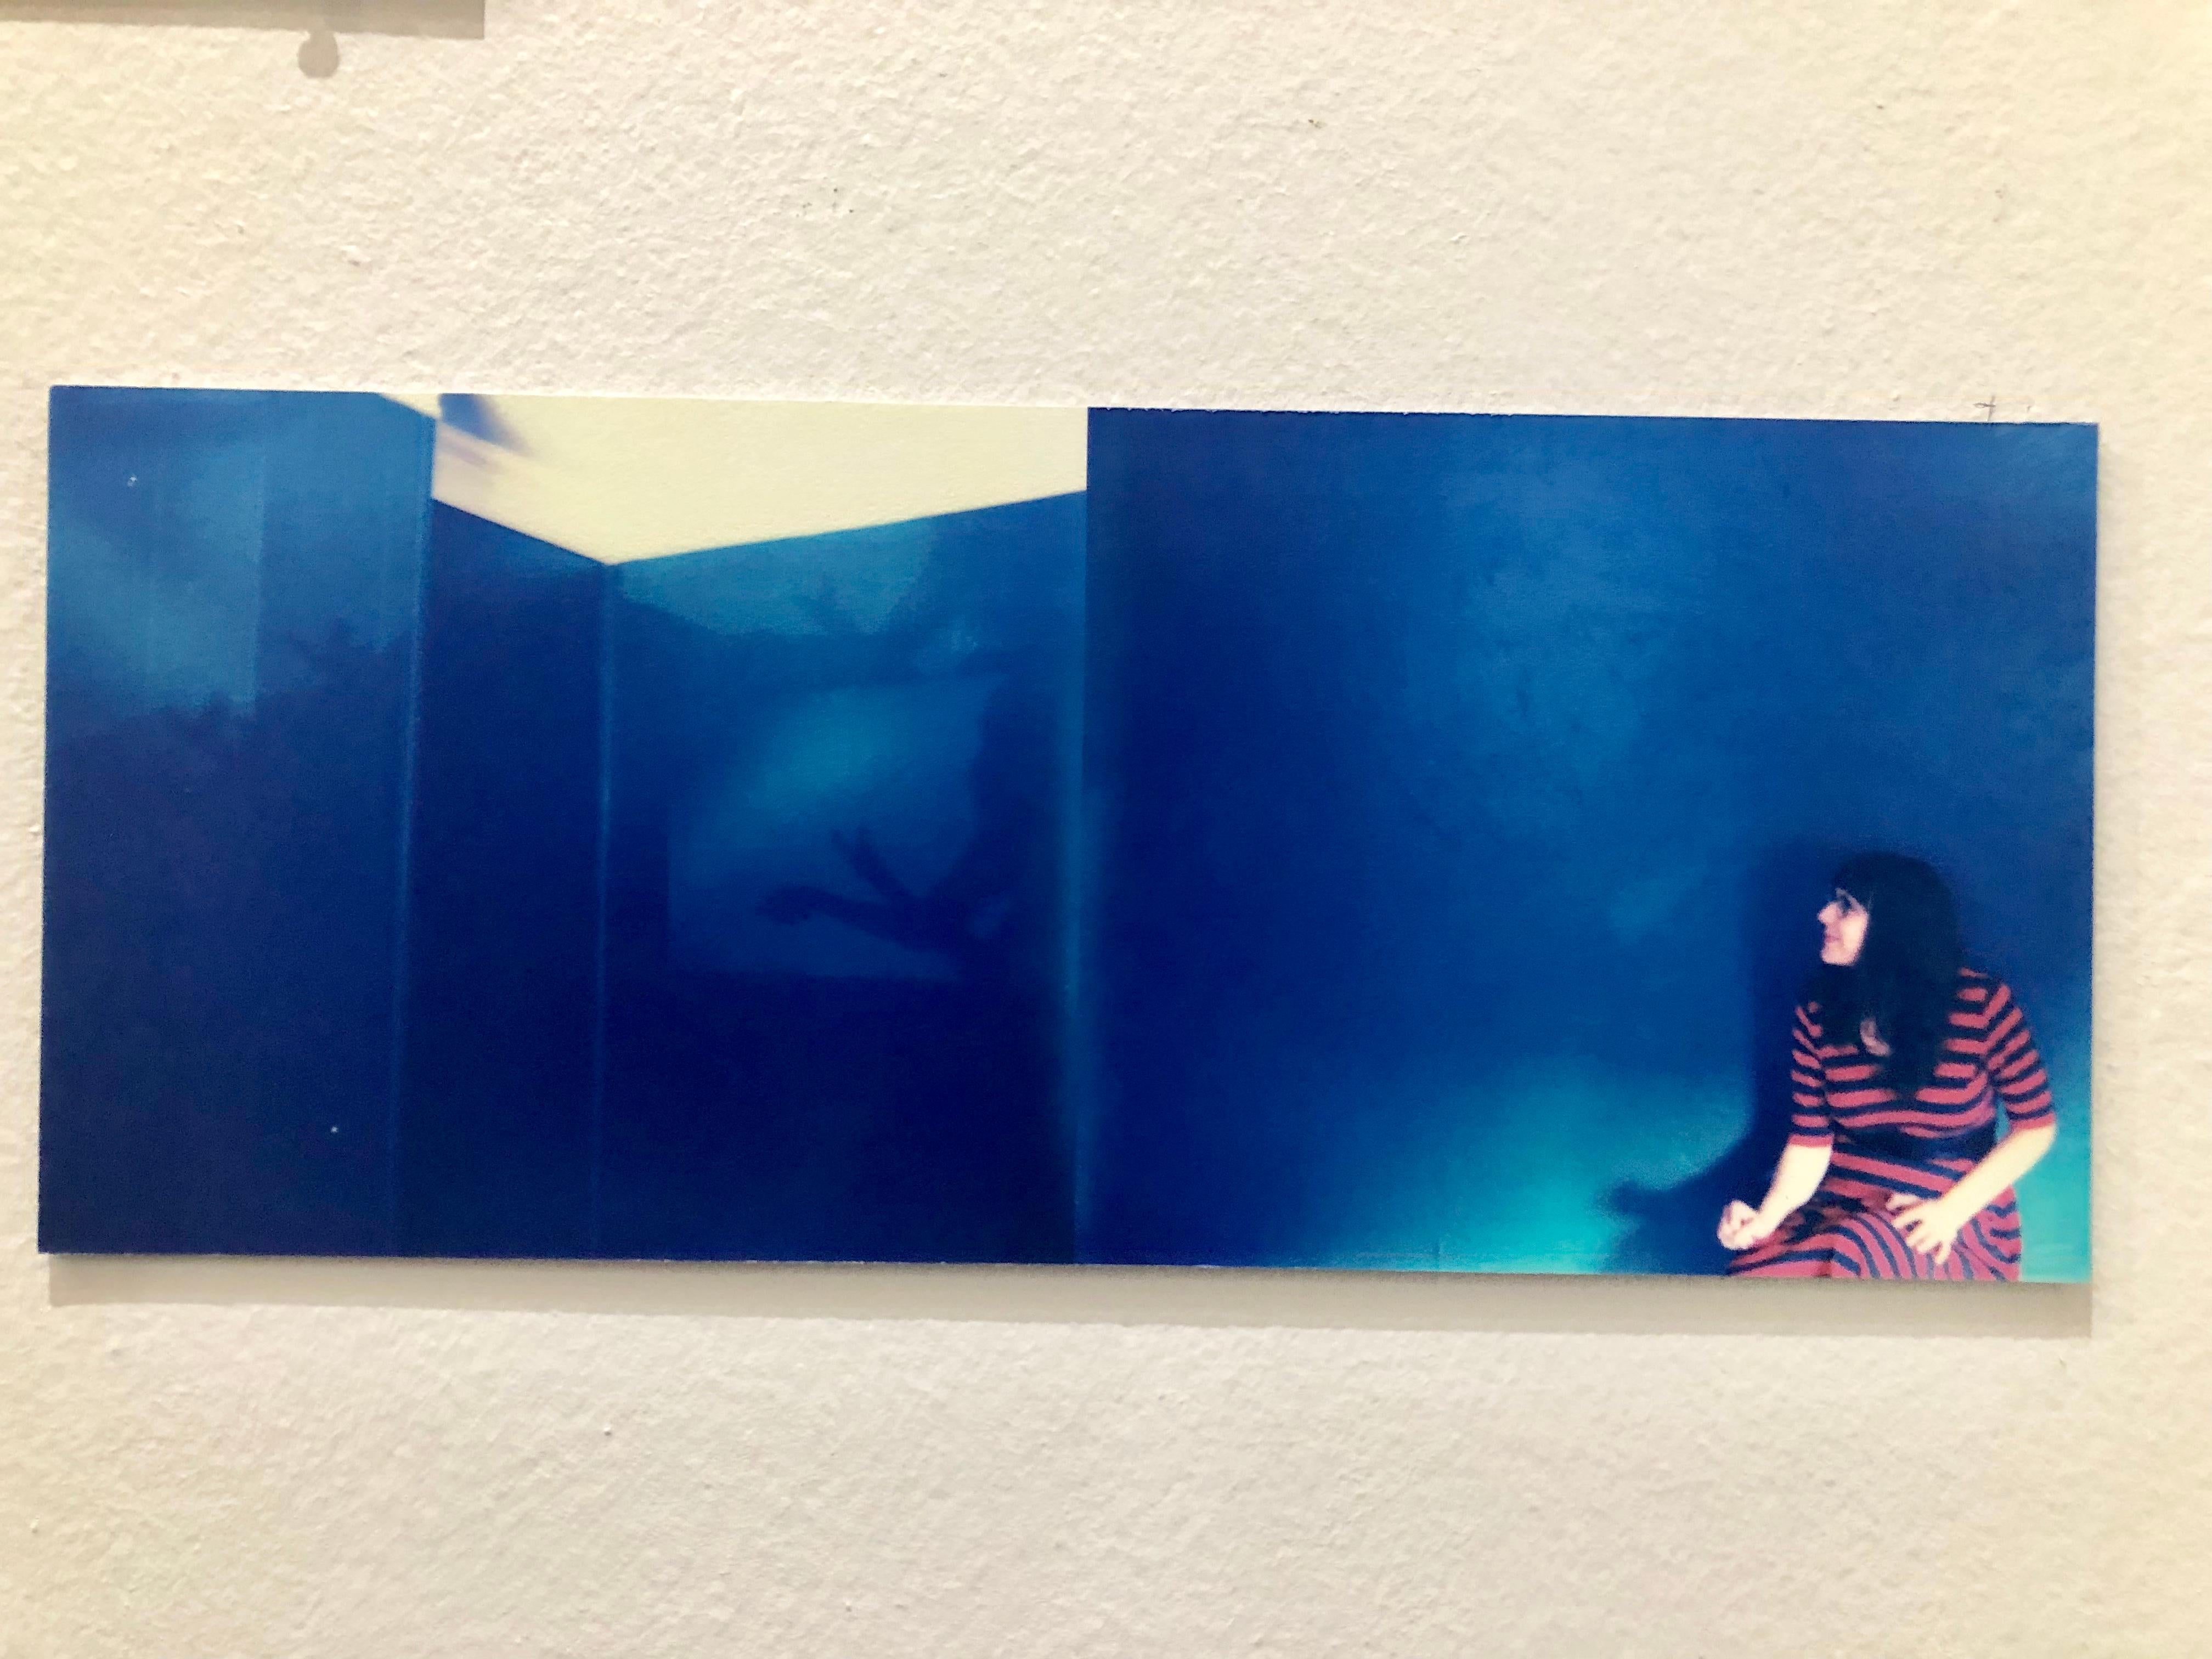 'Shadow Play', diptych - 2016

'We painted the room deep blue sea over the mint green and opened the blinds, allowing the sun to flood in waves across the walls. We furnished it in light.'

20x48cm, 
Edition of 10 plus 2 Artist Proofs. 
Archival